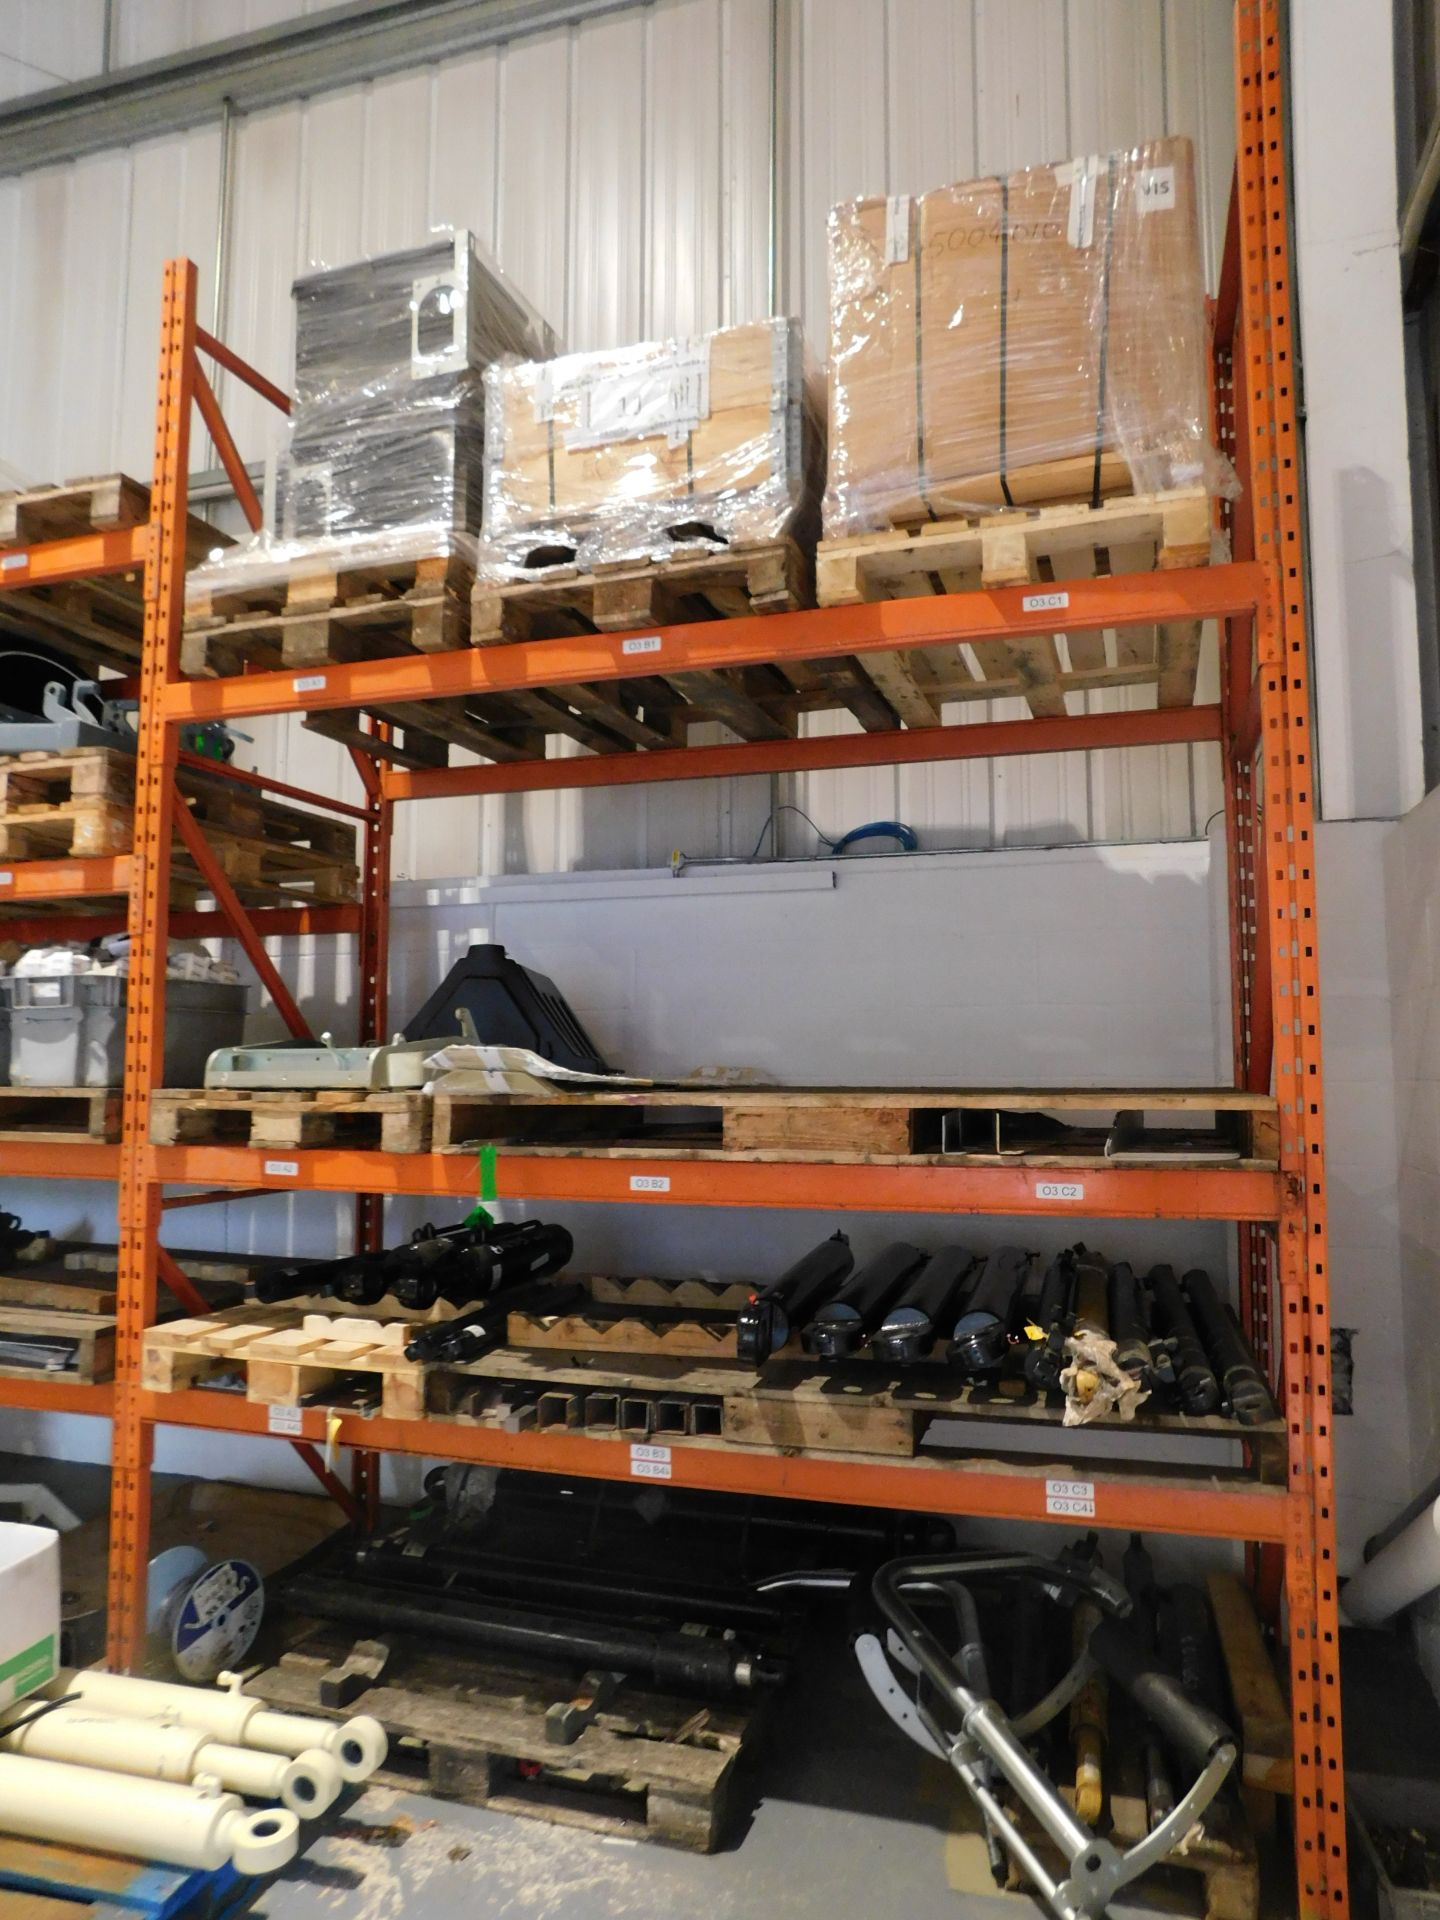 3 Bays of Boltless Pallet Racking (Contents not Included) (Collection Delayed to Tuesday 18th June - Image 3 of 5